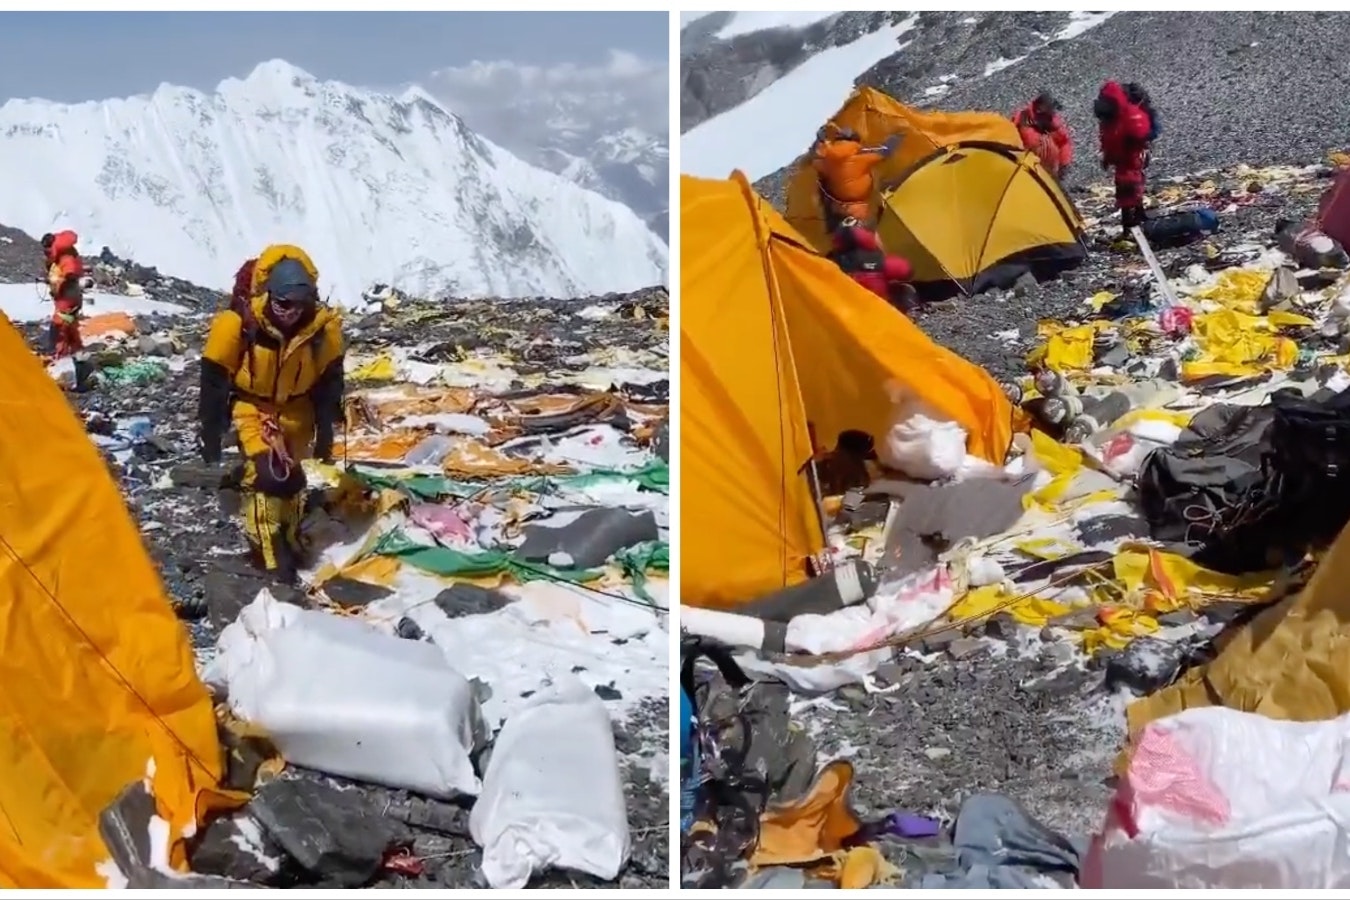 These images from a video posted to the Everest Today Twitter feed show how Mount Everest has turned into what some are calling "the world's highest garbage dump."